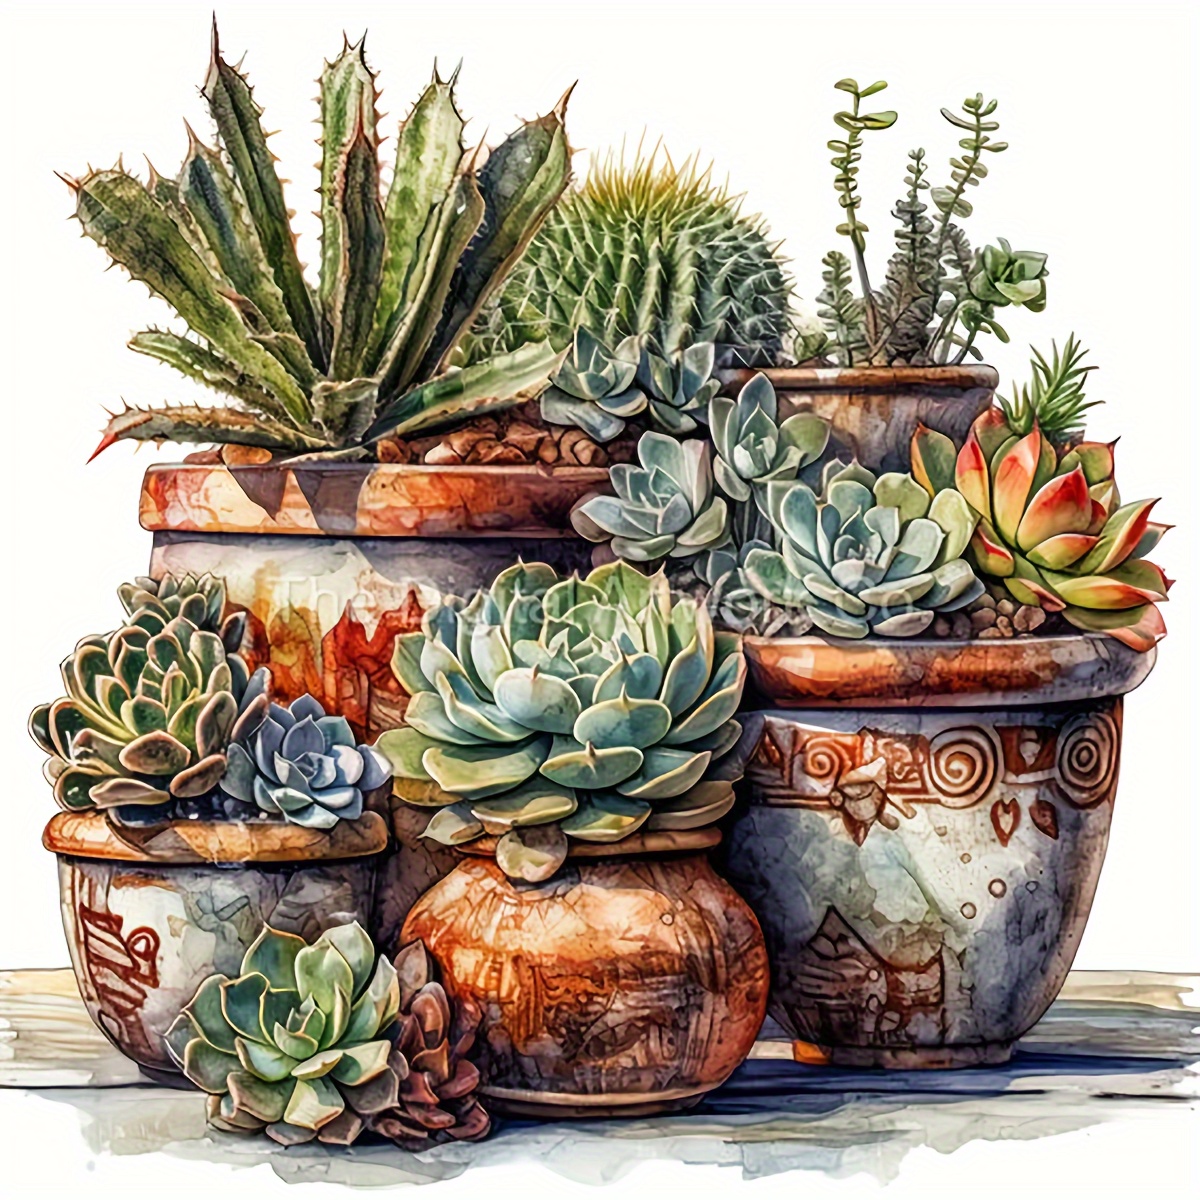 

Succulent Cactus Potted Plants Diy 5d Round Full Drill Diamond Painting Kit For Beginners Adults, Unique Handmade Surprise Gift, Flower Theme Acrylic Diamond Craft Set 25x25cm